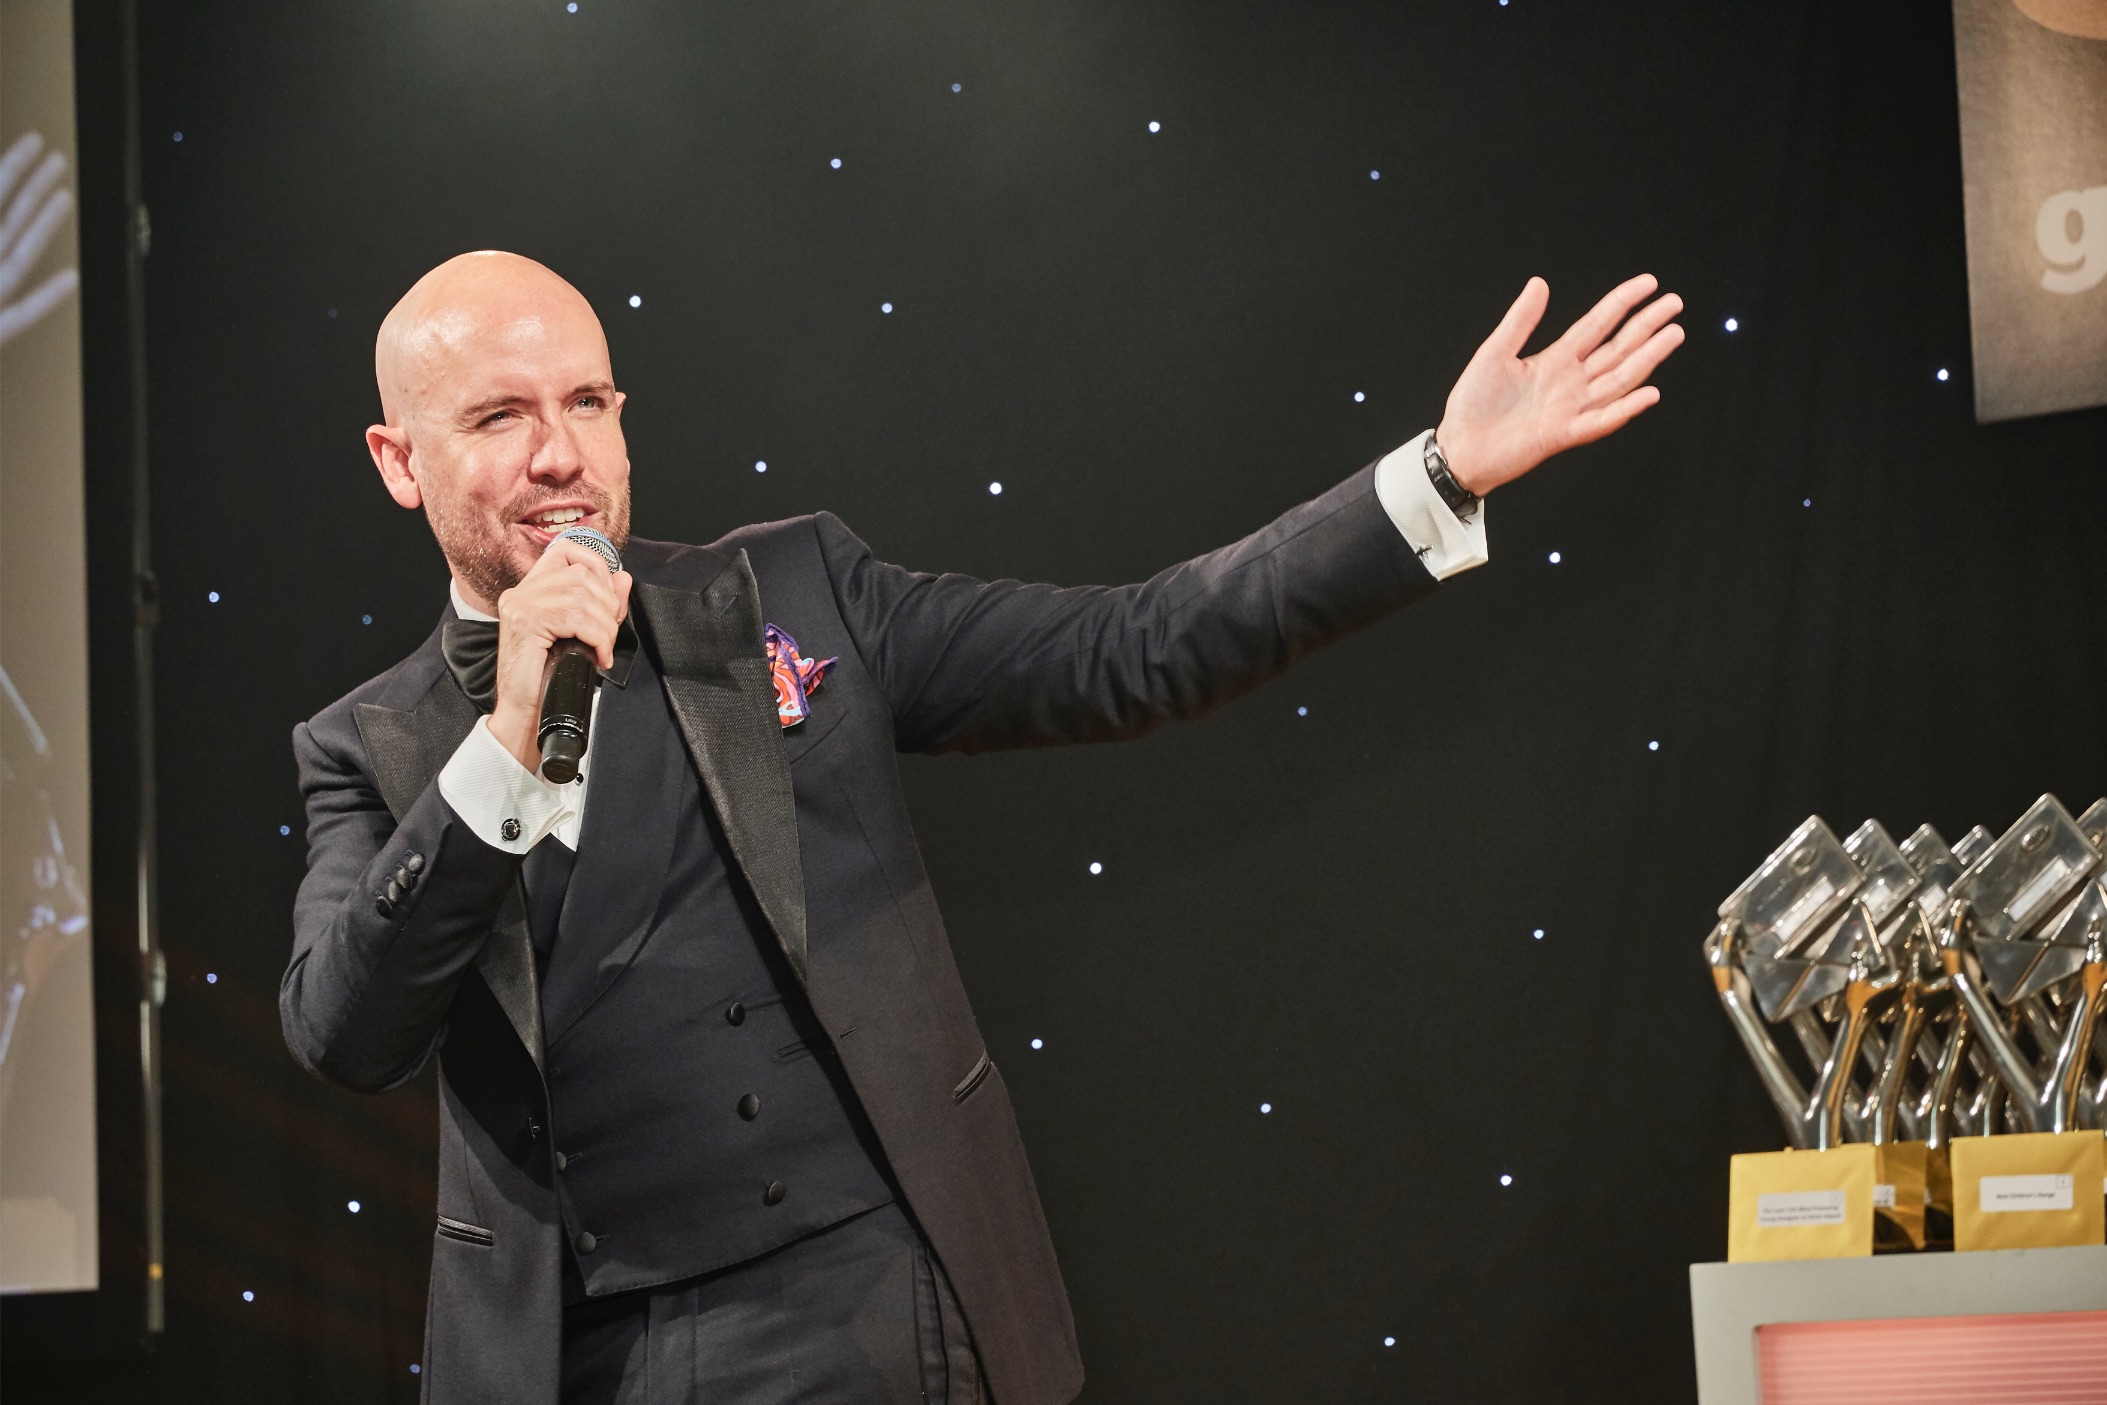 Above: Tom Allen was such a superb host of The Henries 2019 that he was the top choice for this year’s event too.